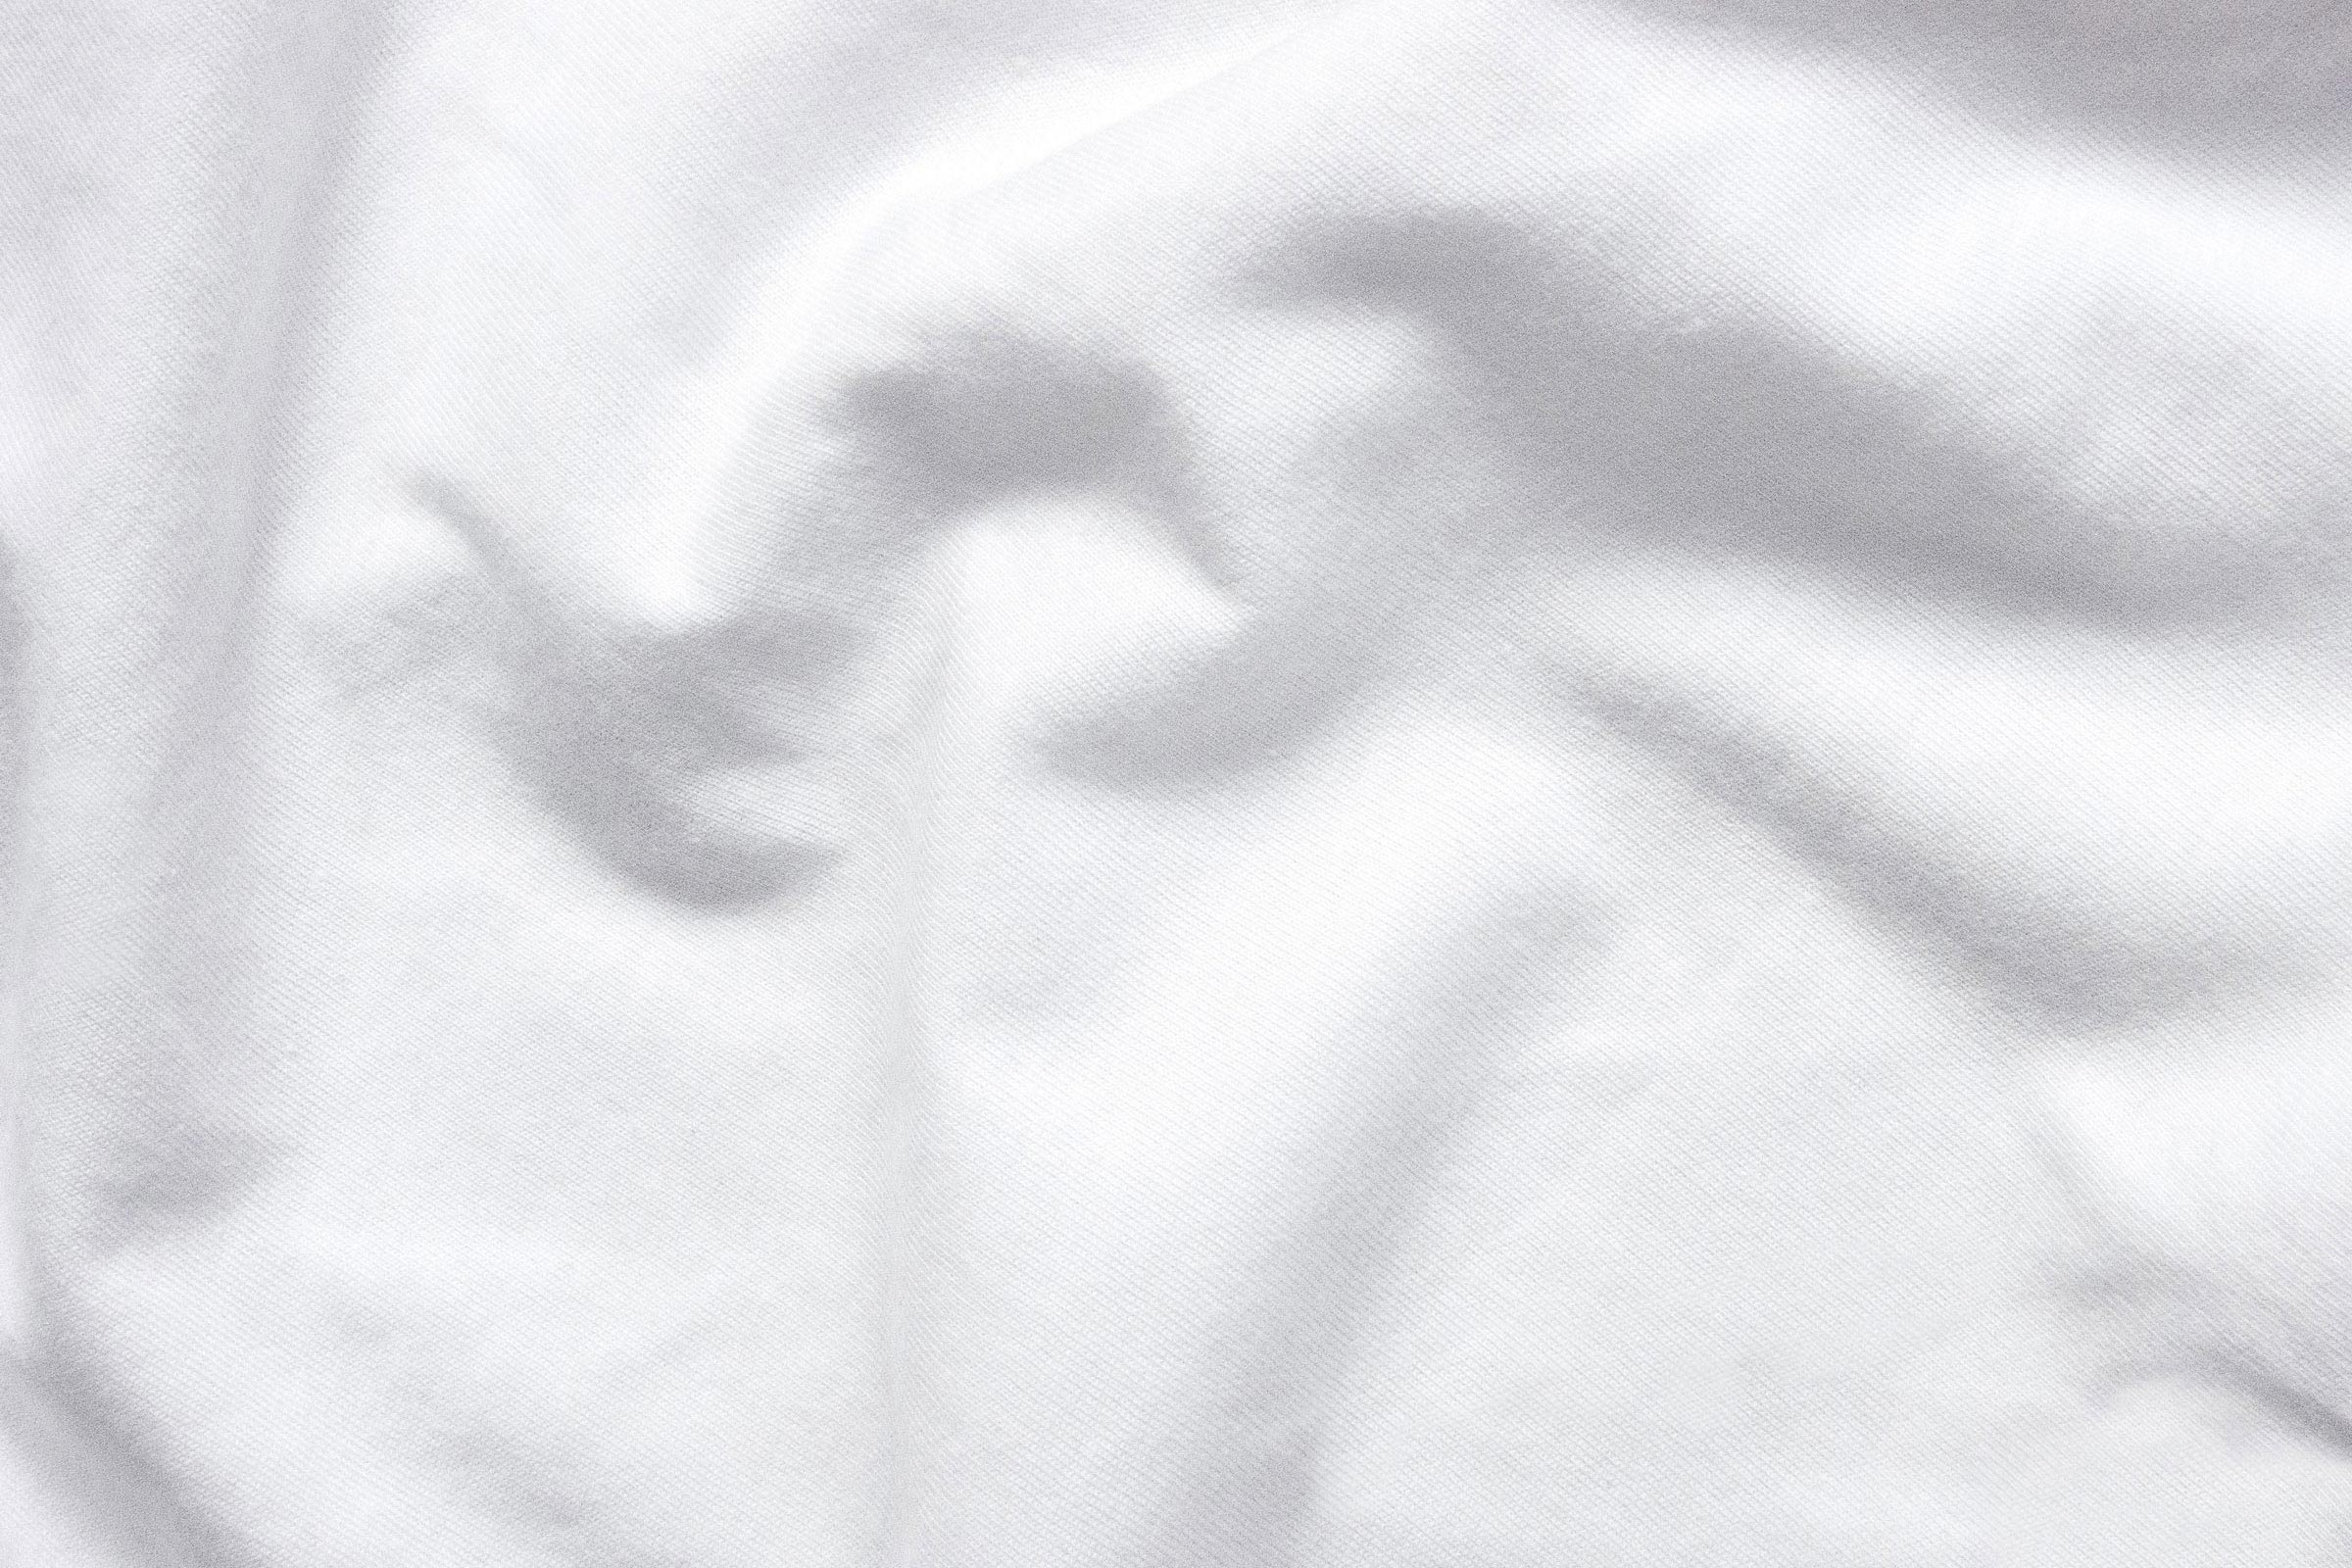 jersey-white-duvet-cover-close-up-shot-by-sojao.jpg